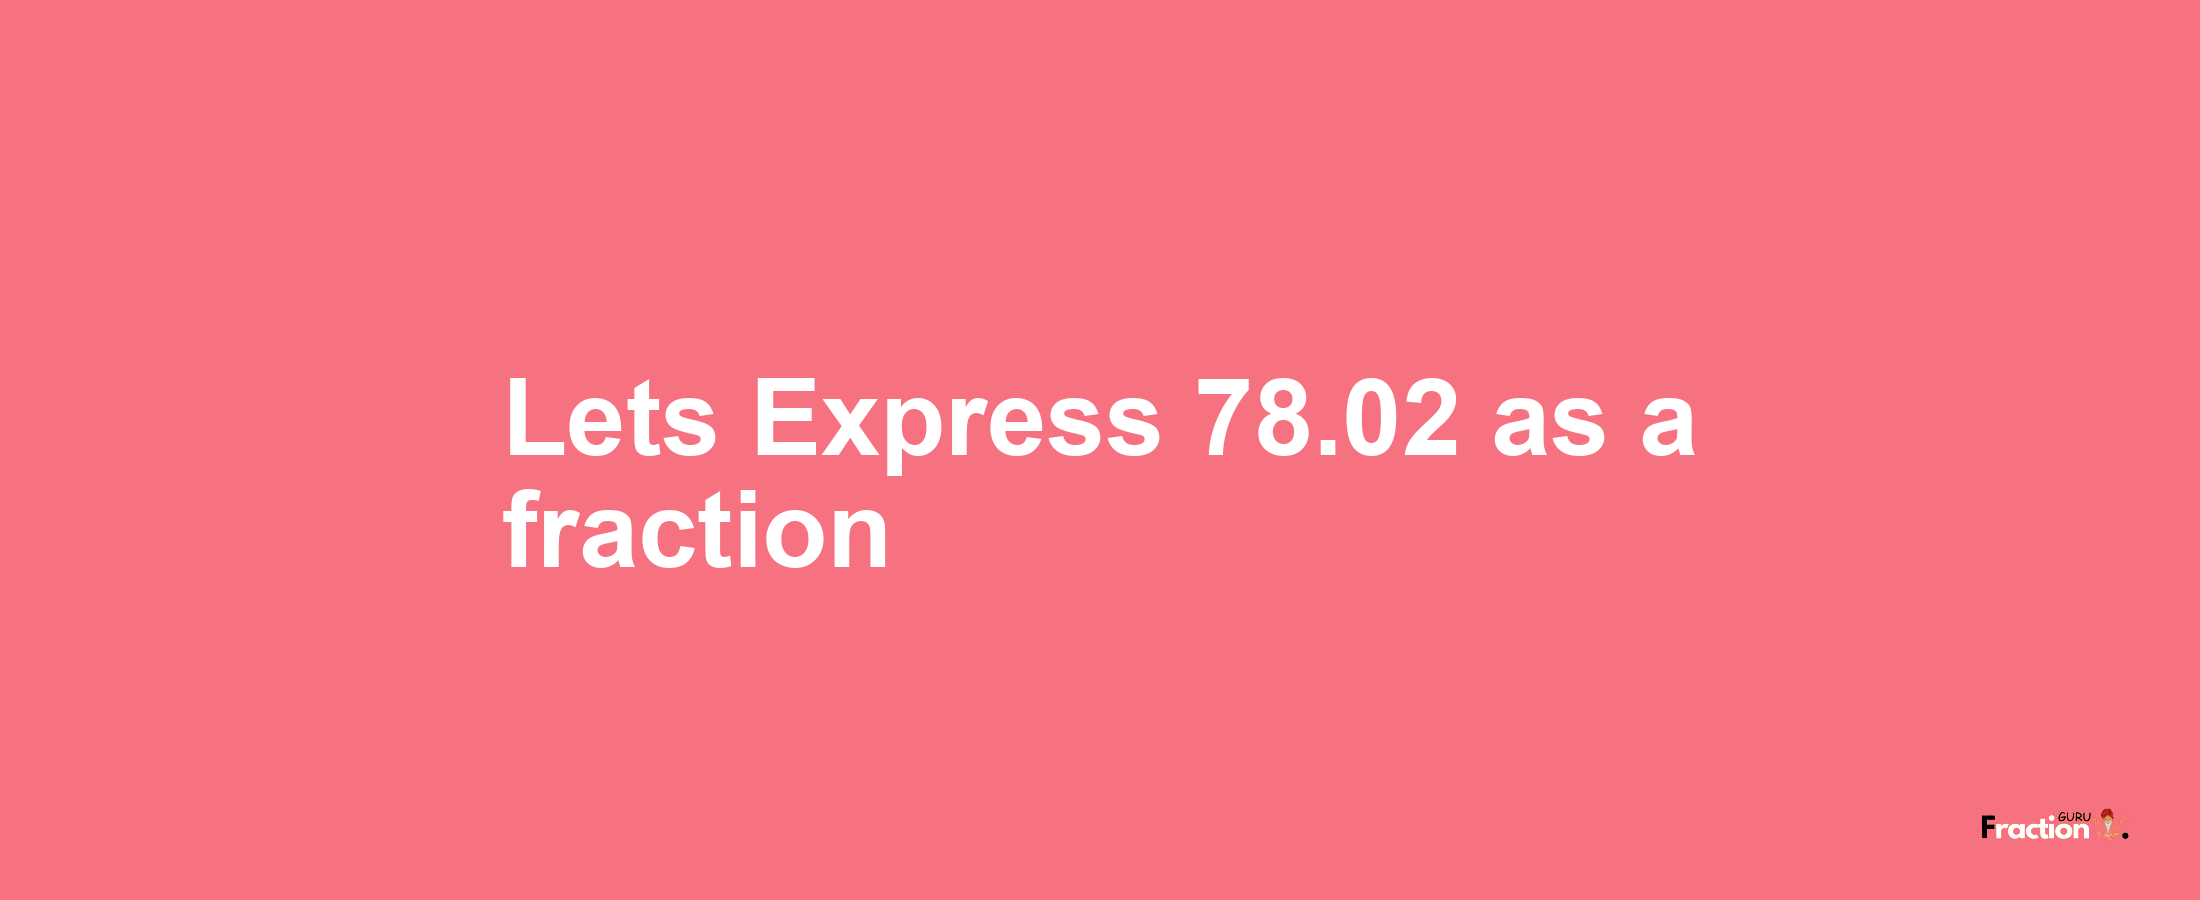 Lets Express 78.02 as afraction